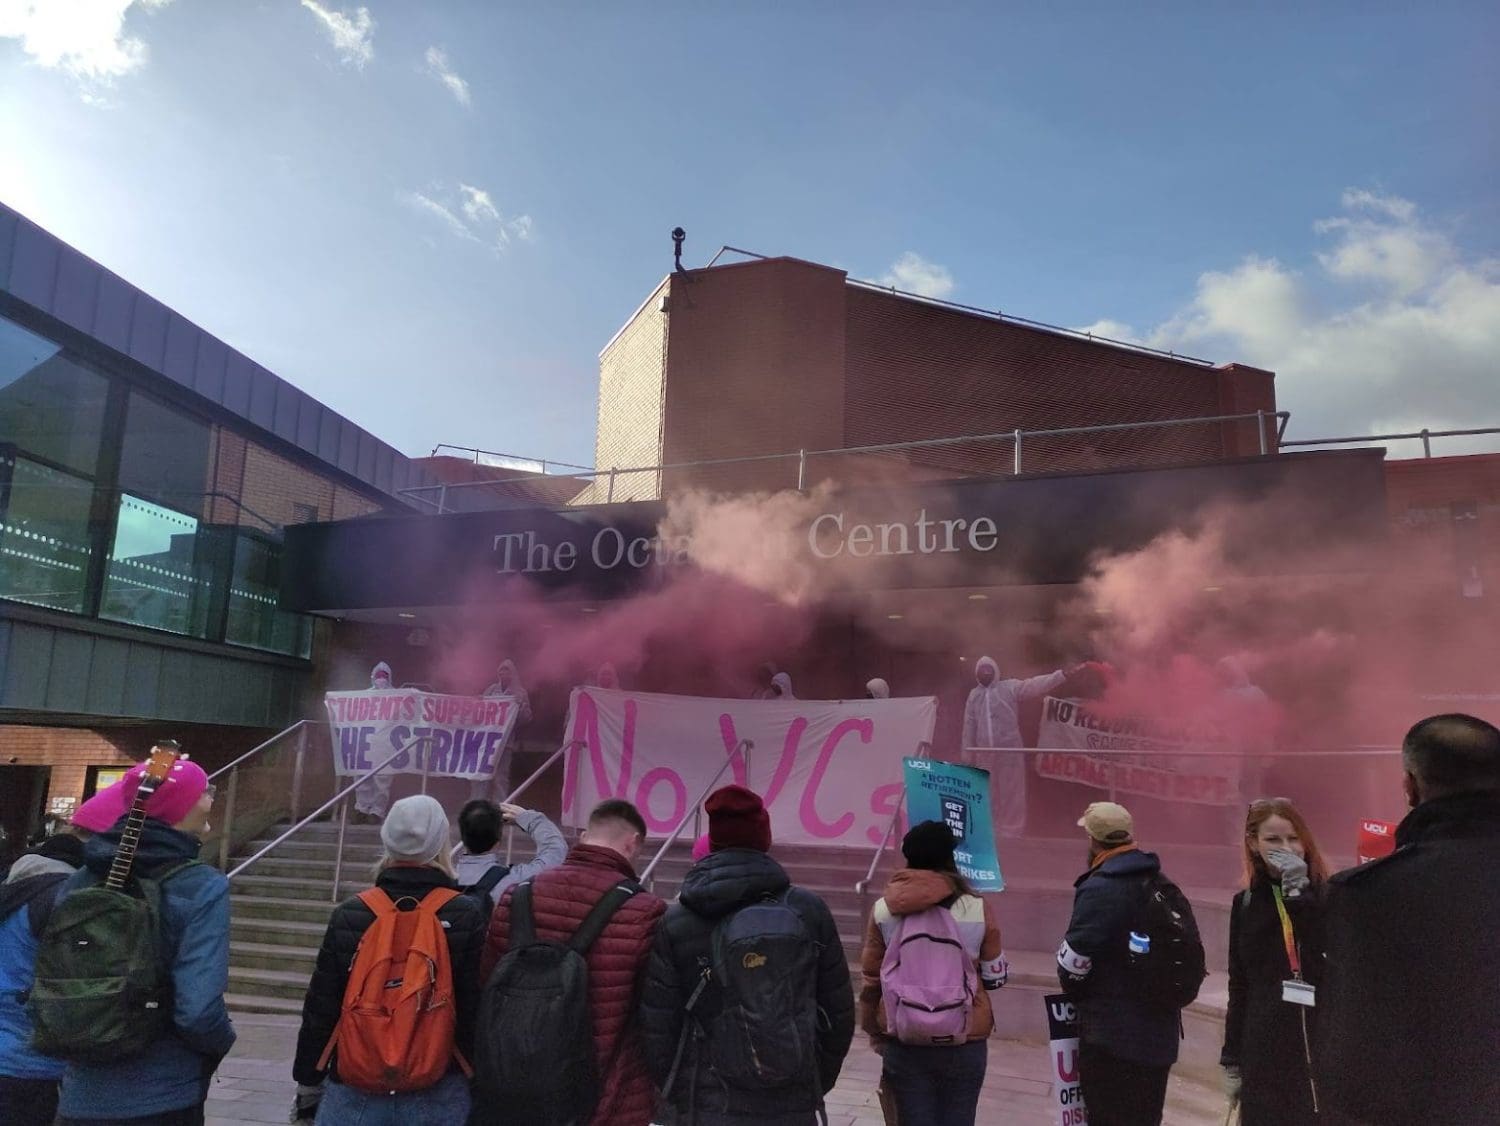 Students occupying universities like this one in Sheffield in support of the UCU strike - a photo of protesters setting of smoke flares and holding banners while people look on 